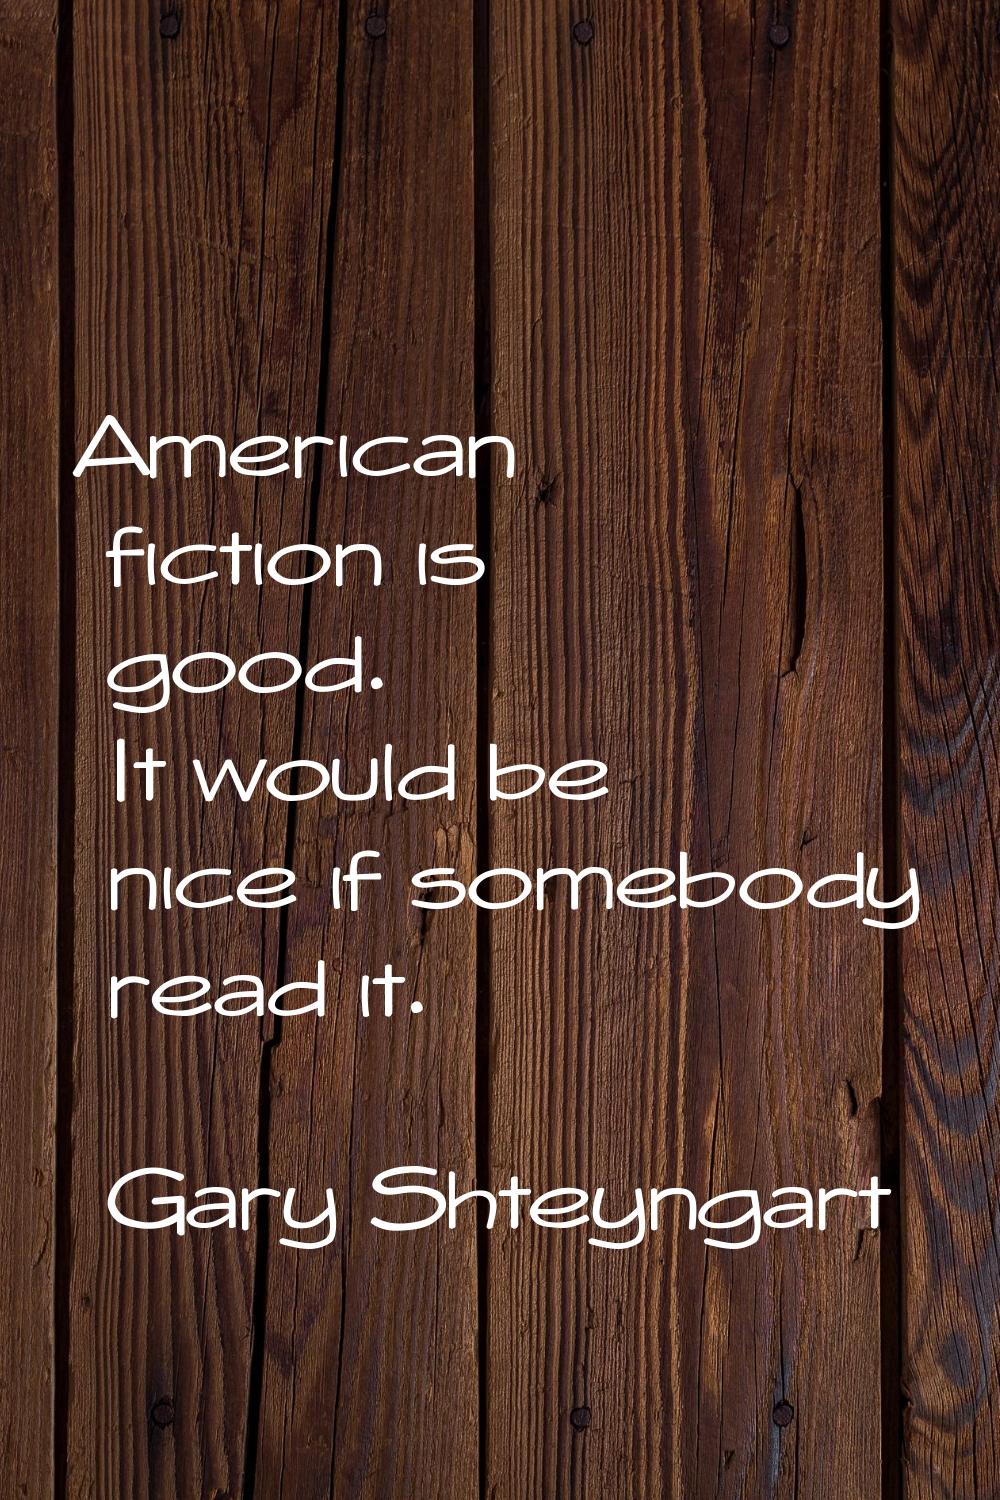 American fiction is good. It would be nice if somebody read it.